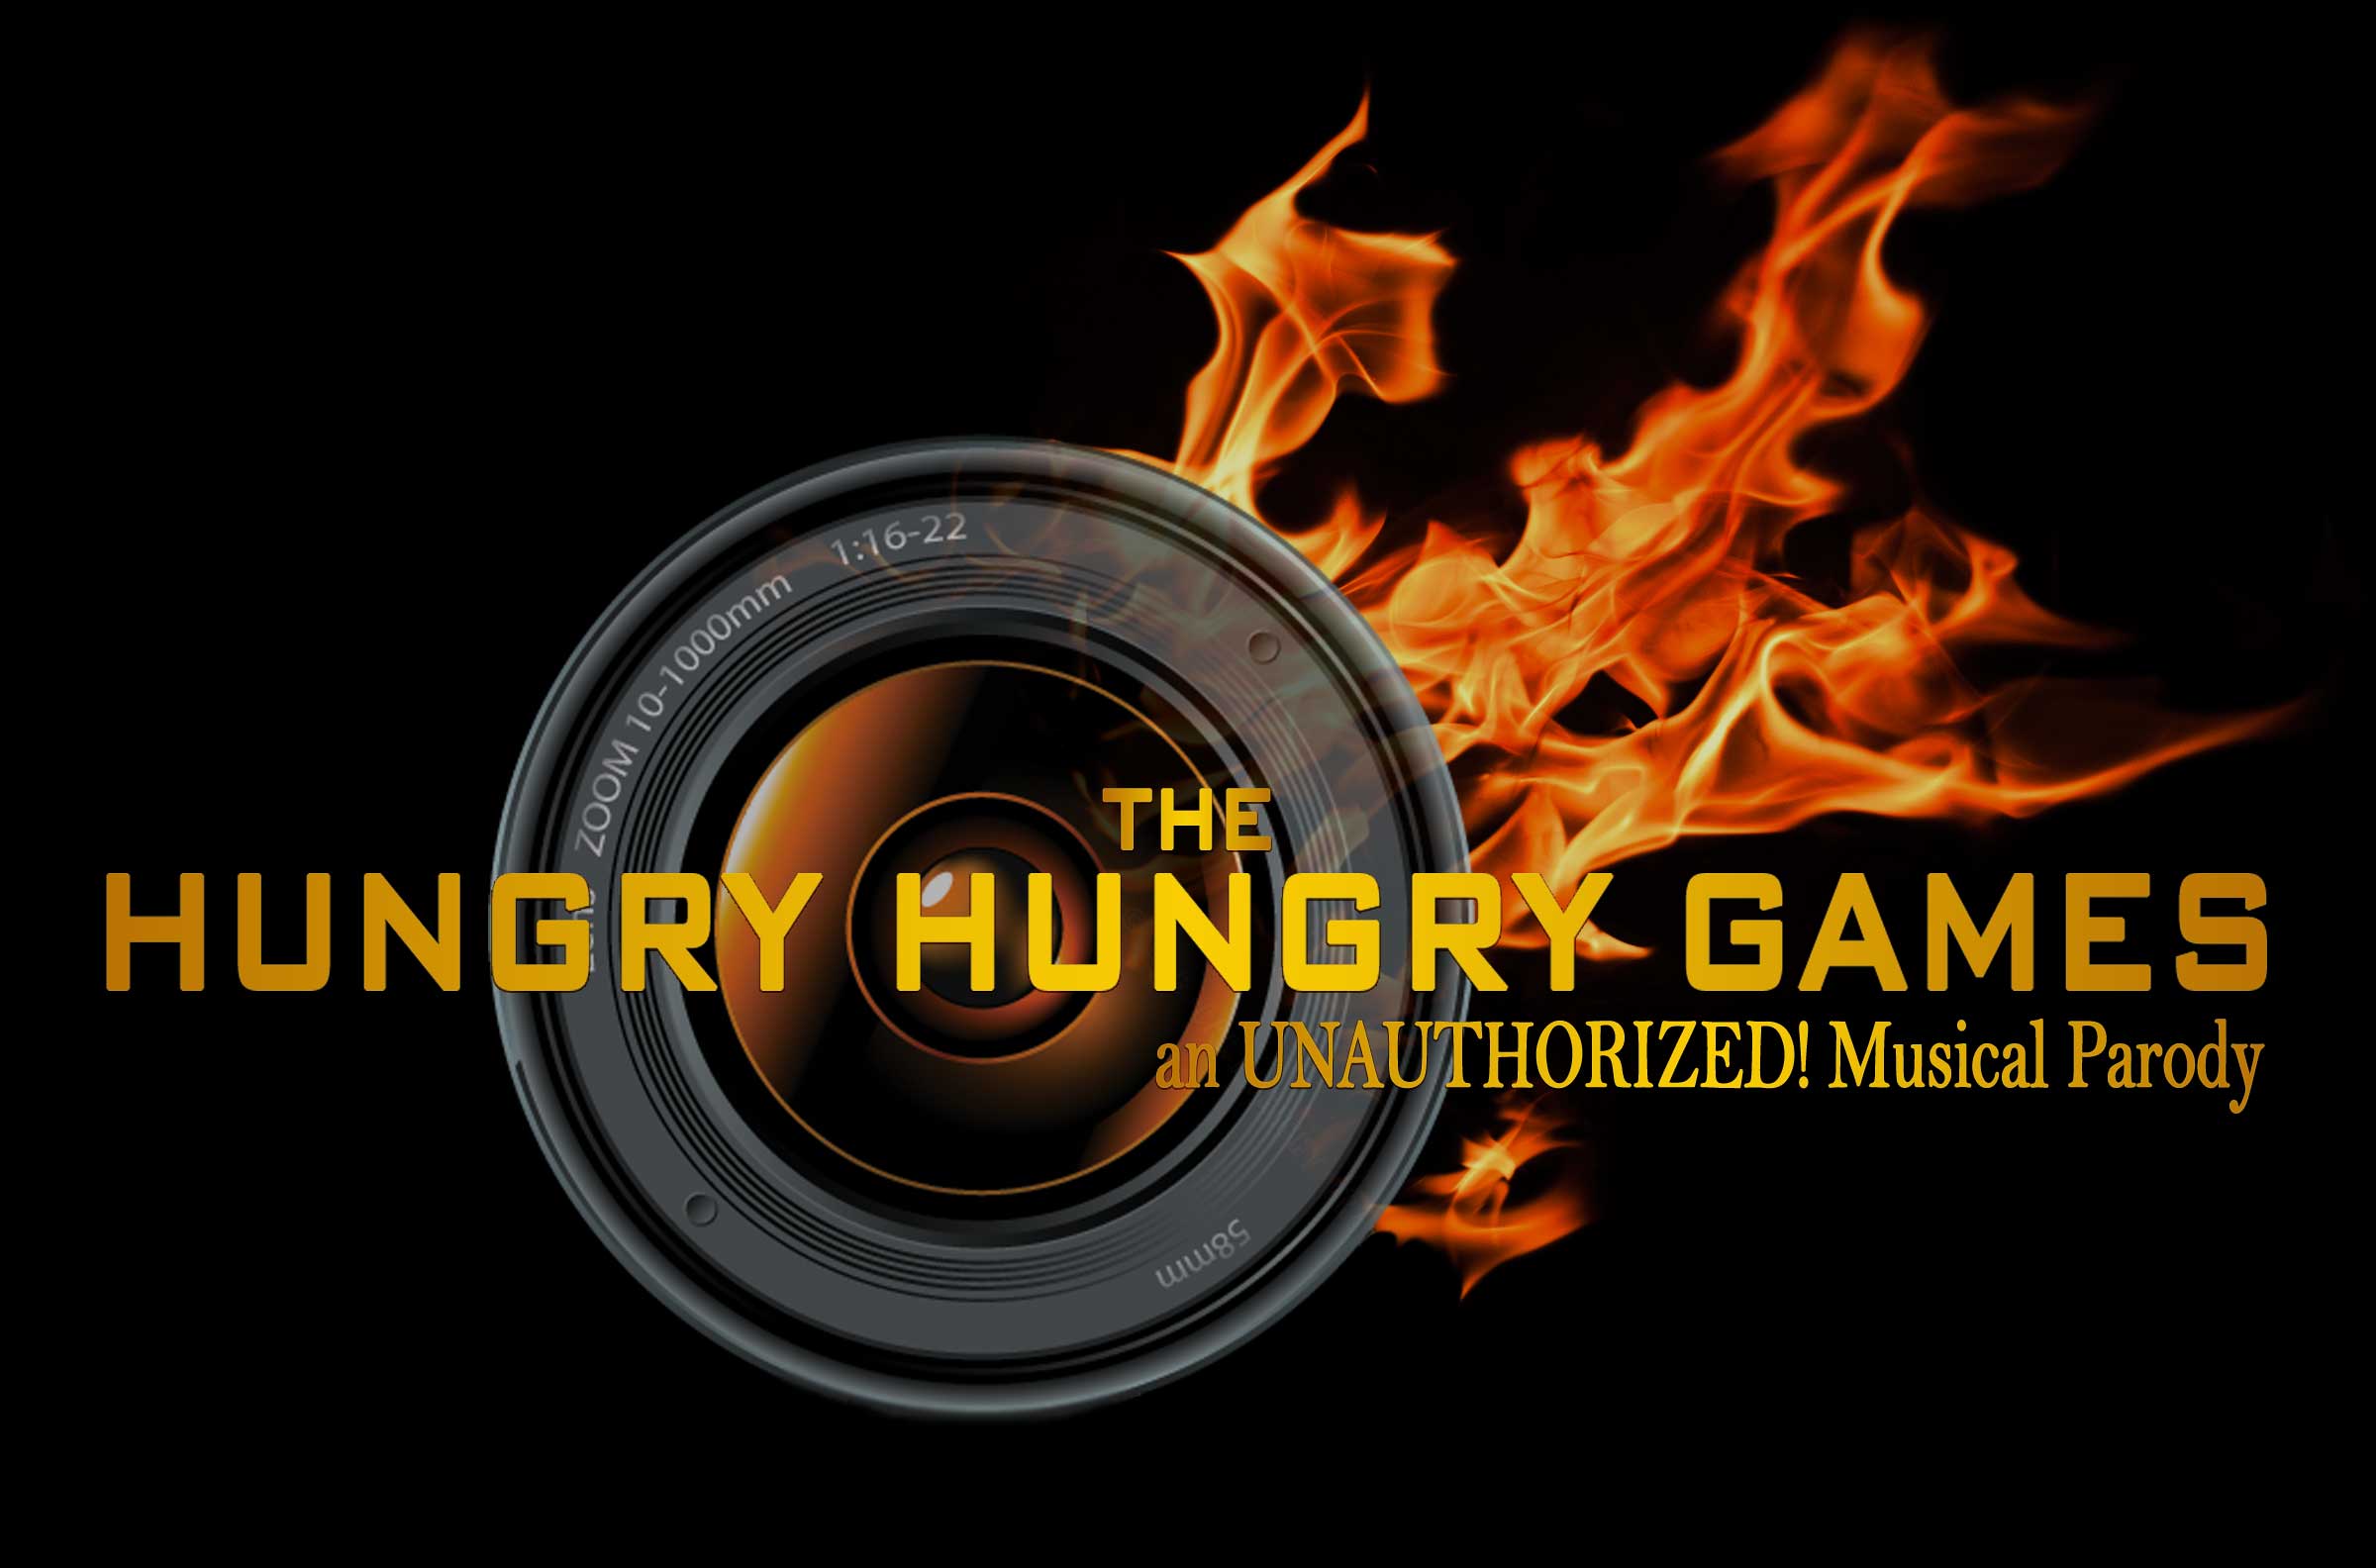 The Hungry Hungry Games: The UNAUTHORIZED! Musical Parody